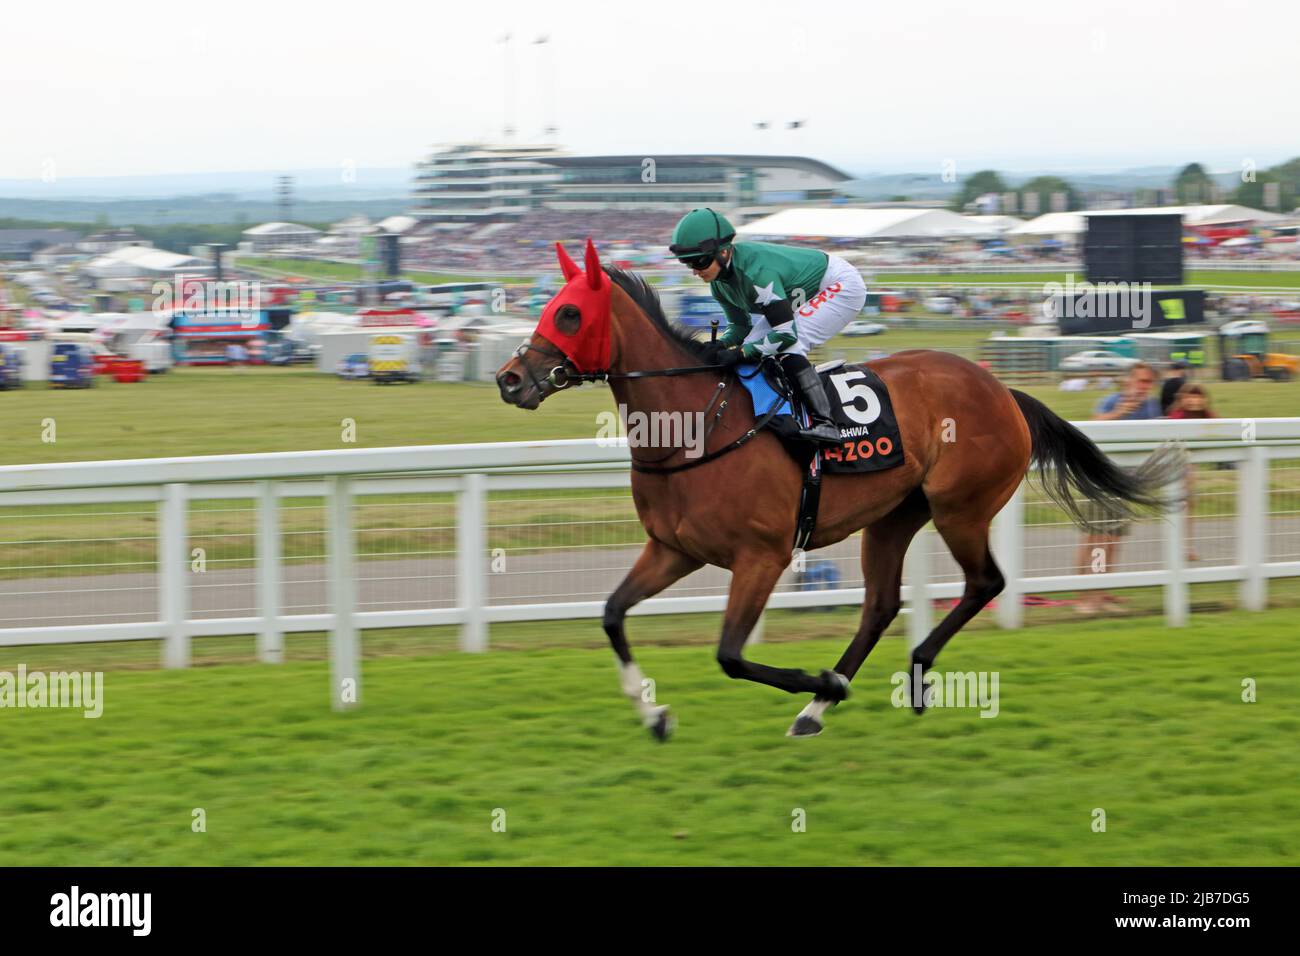 Epsom Downs, Surrey, England, UK. 3rd June, 2022. Female jockey Hollie Doyle on Nashwa, who placed third in the Oaks at Epsom Downs in Surrey, part of the Platinum Jubilee weekend celebrations for the 70 year reign of the British monarch Queen Elizabeth II. Credit: Julia Gavin/Alamy Live News Stock Photo